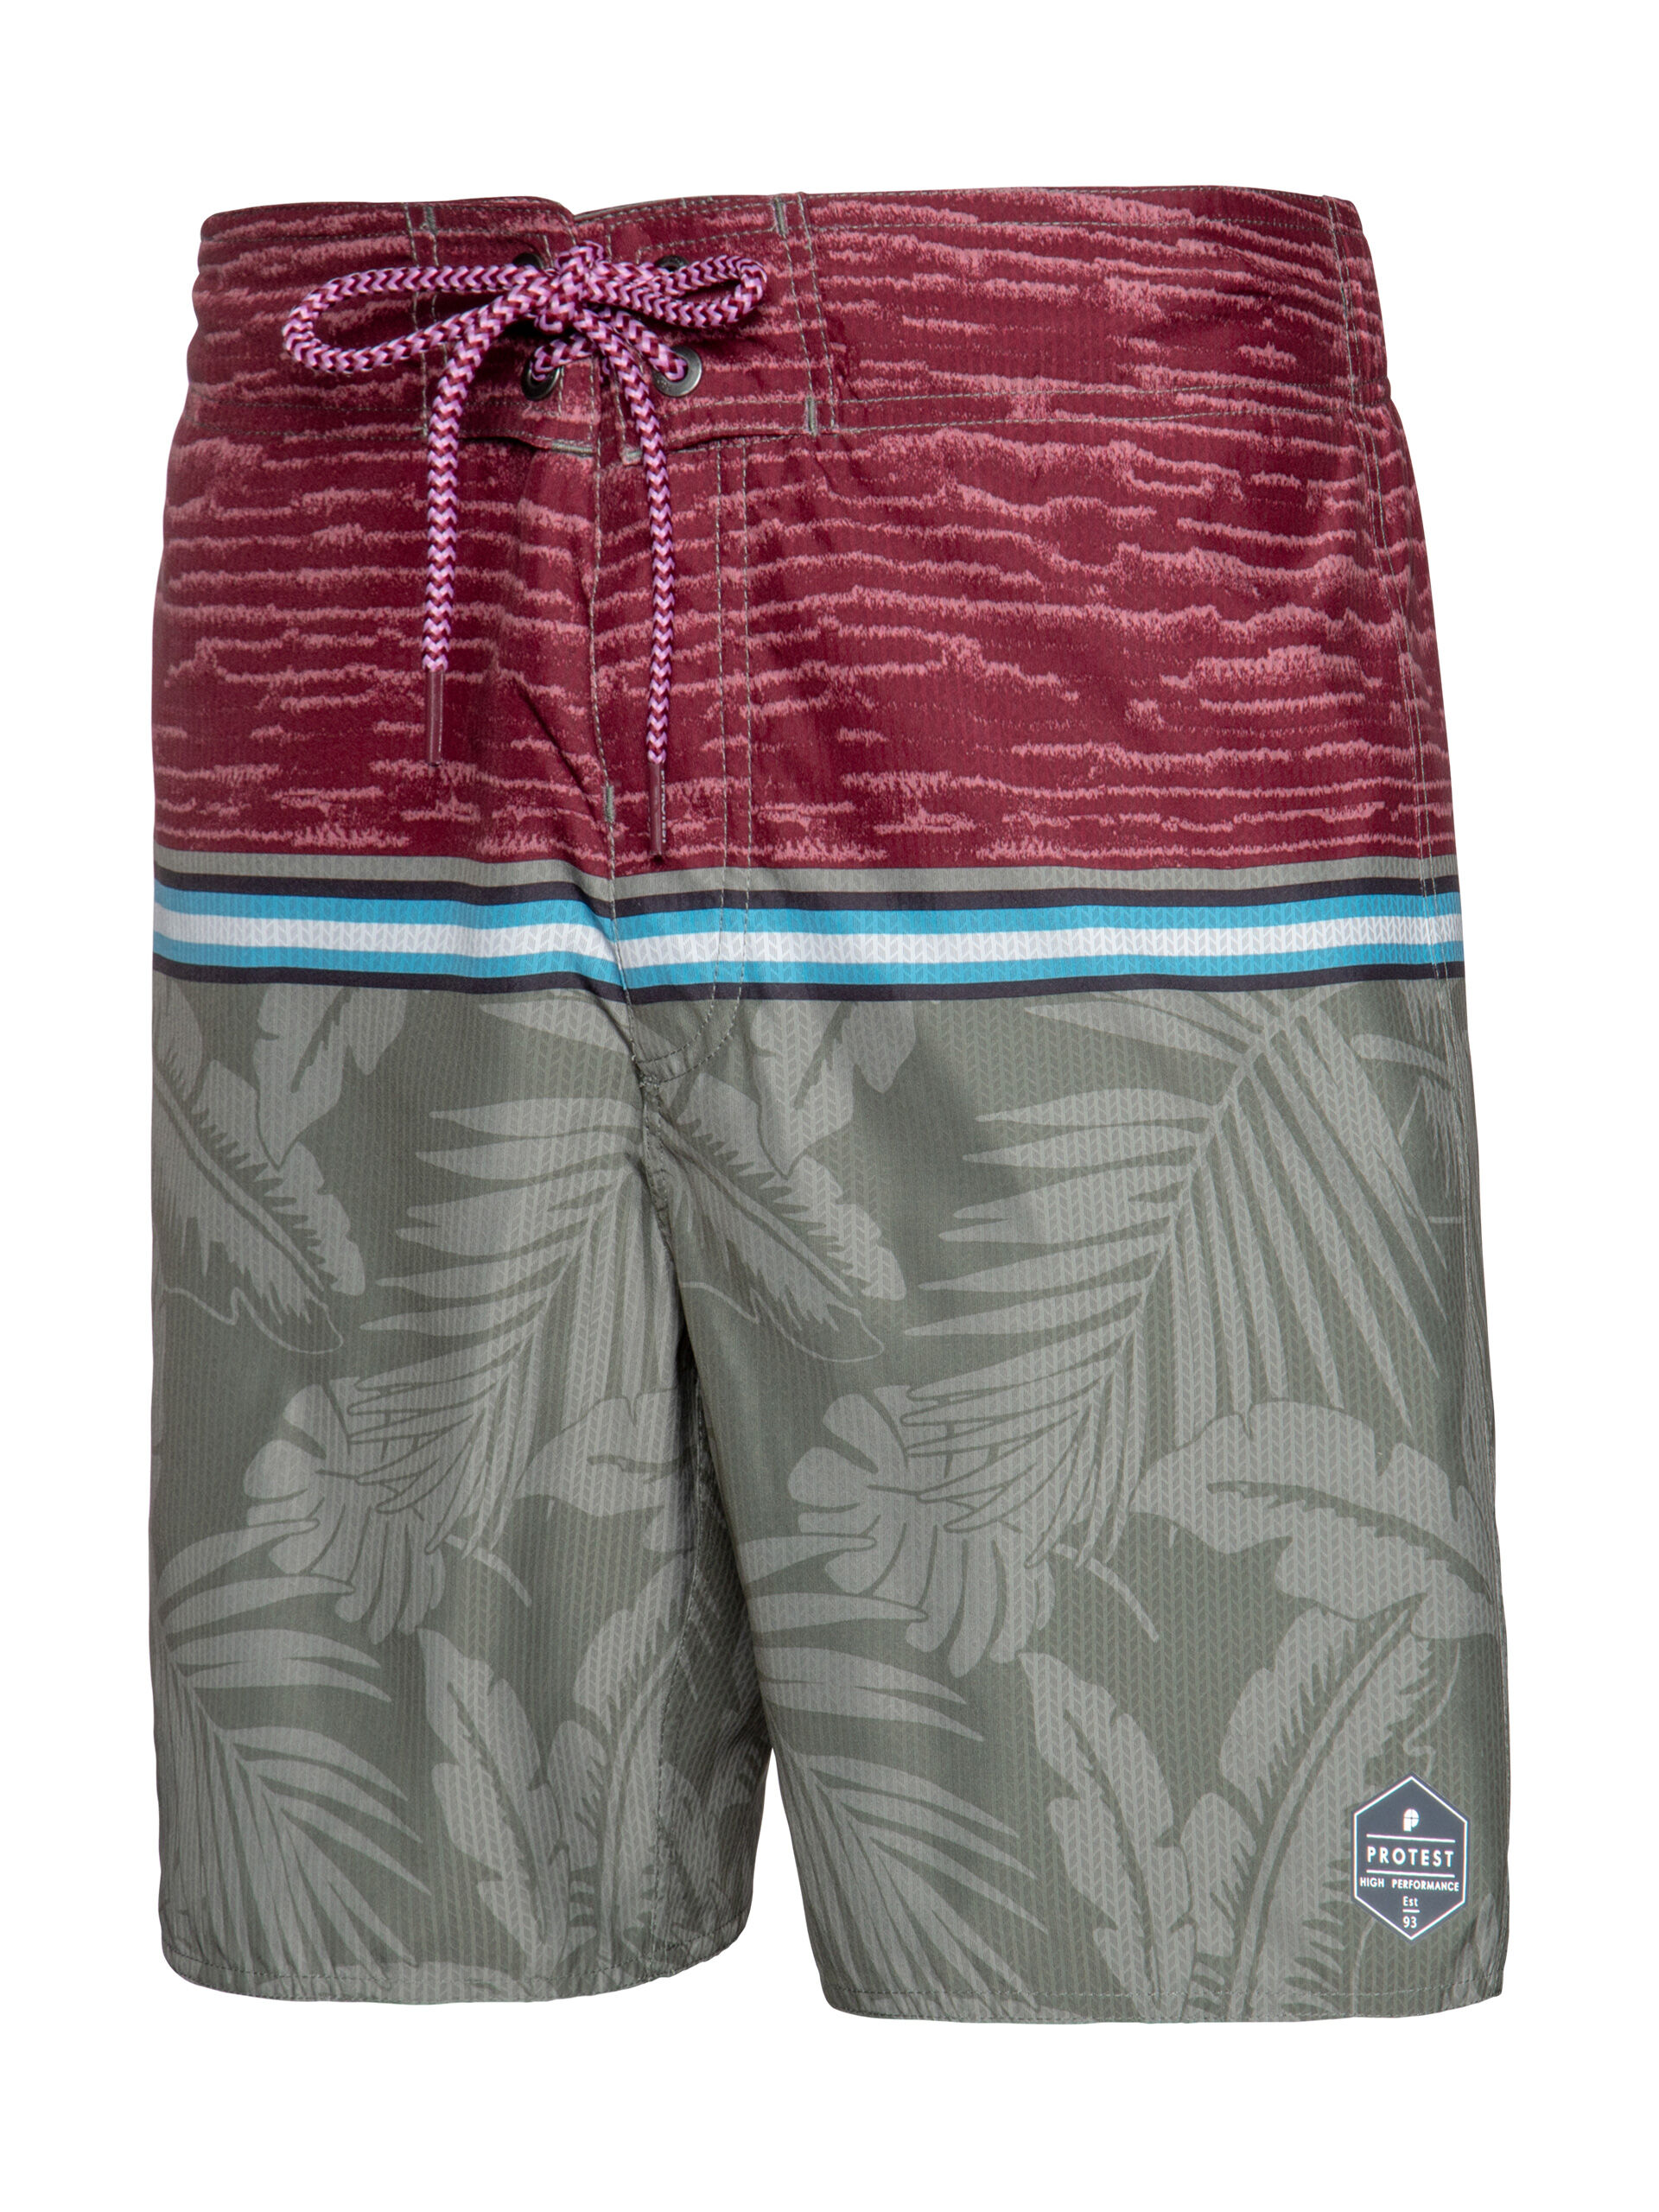 Protest Firsby - Swim shorts - Men's